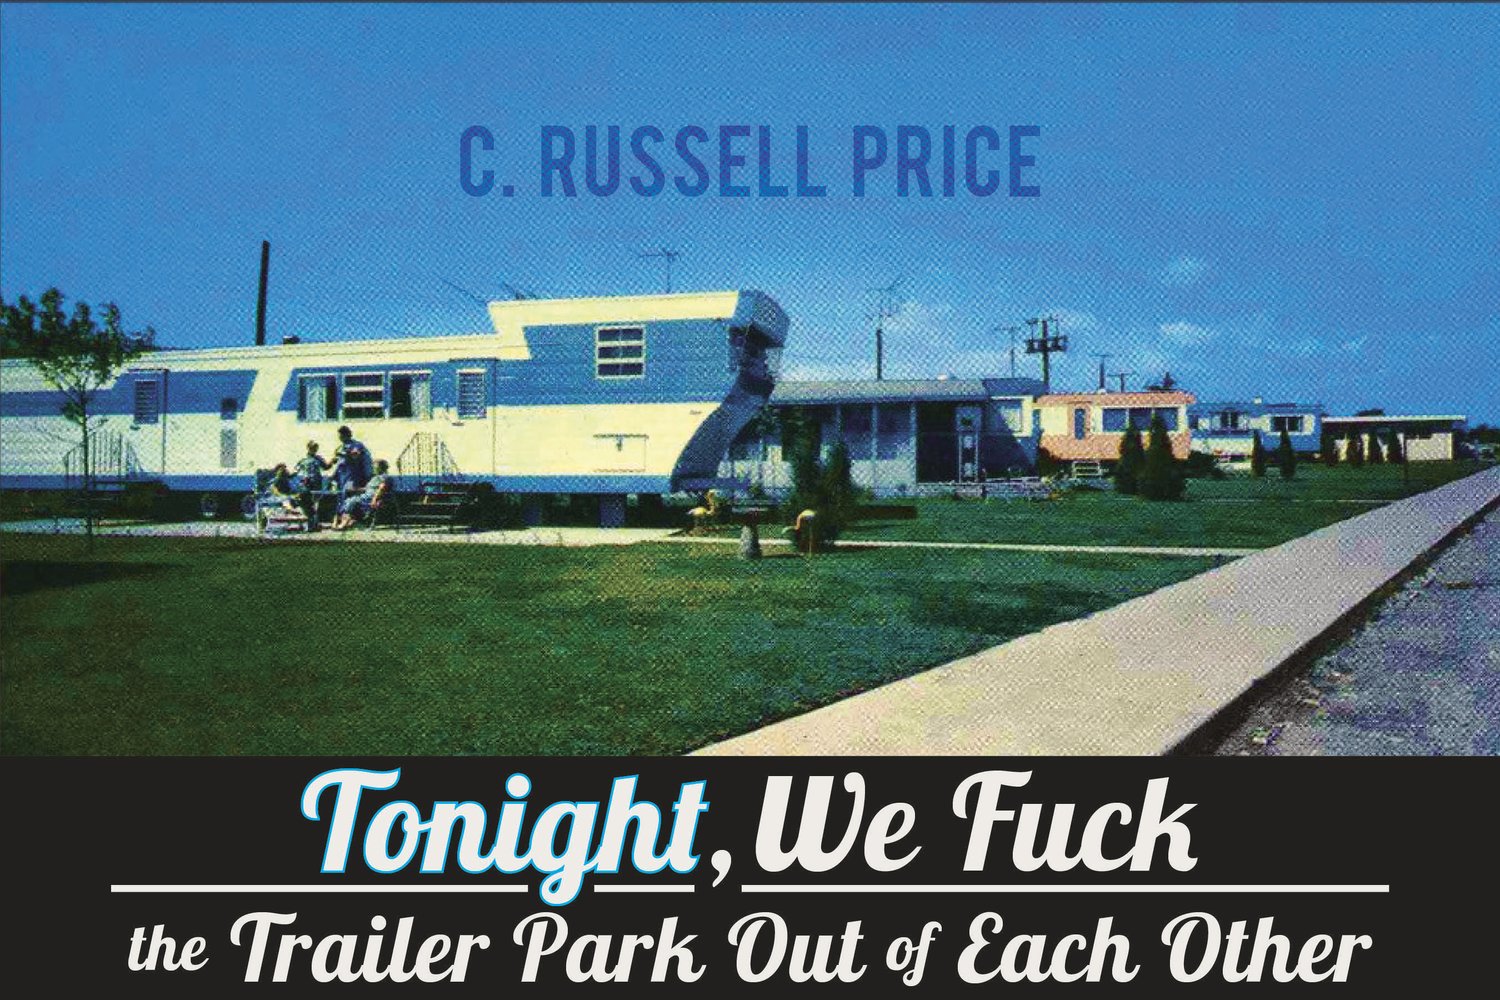 Image of Tonight, We Fuck the Trailer Park Out of Each Other by C. Russell Price